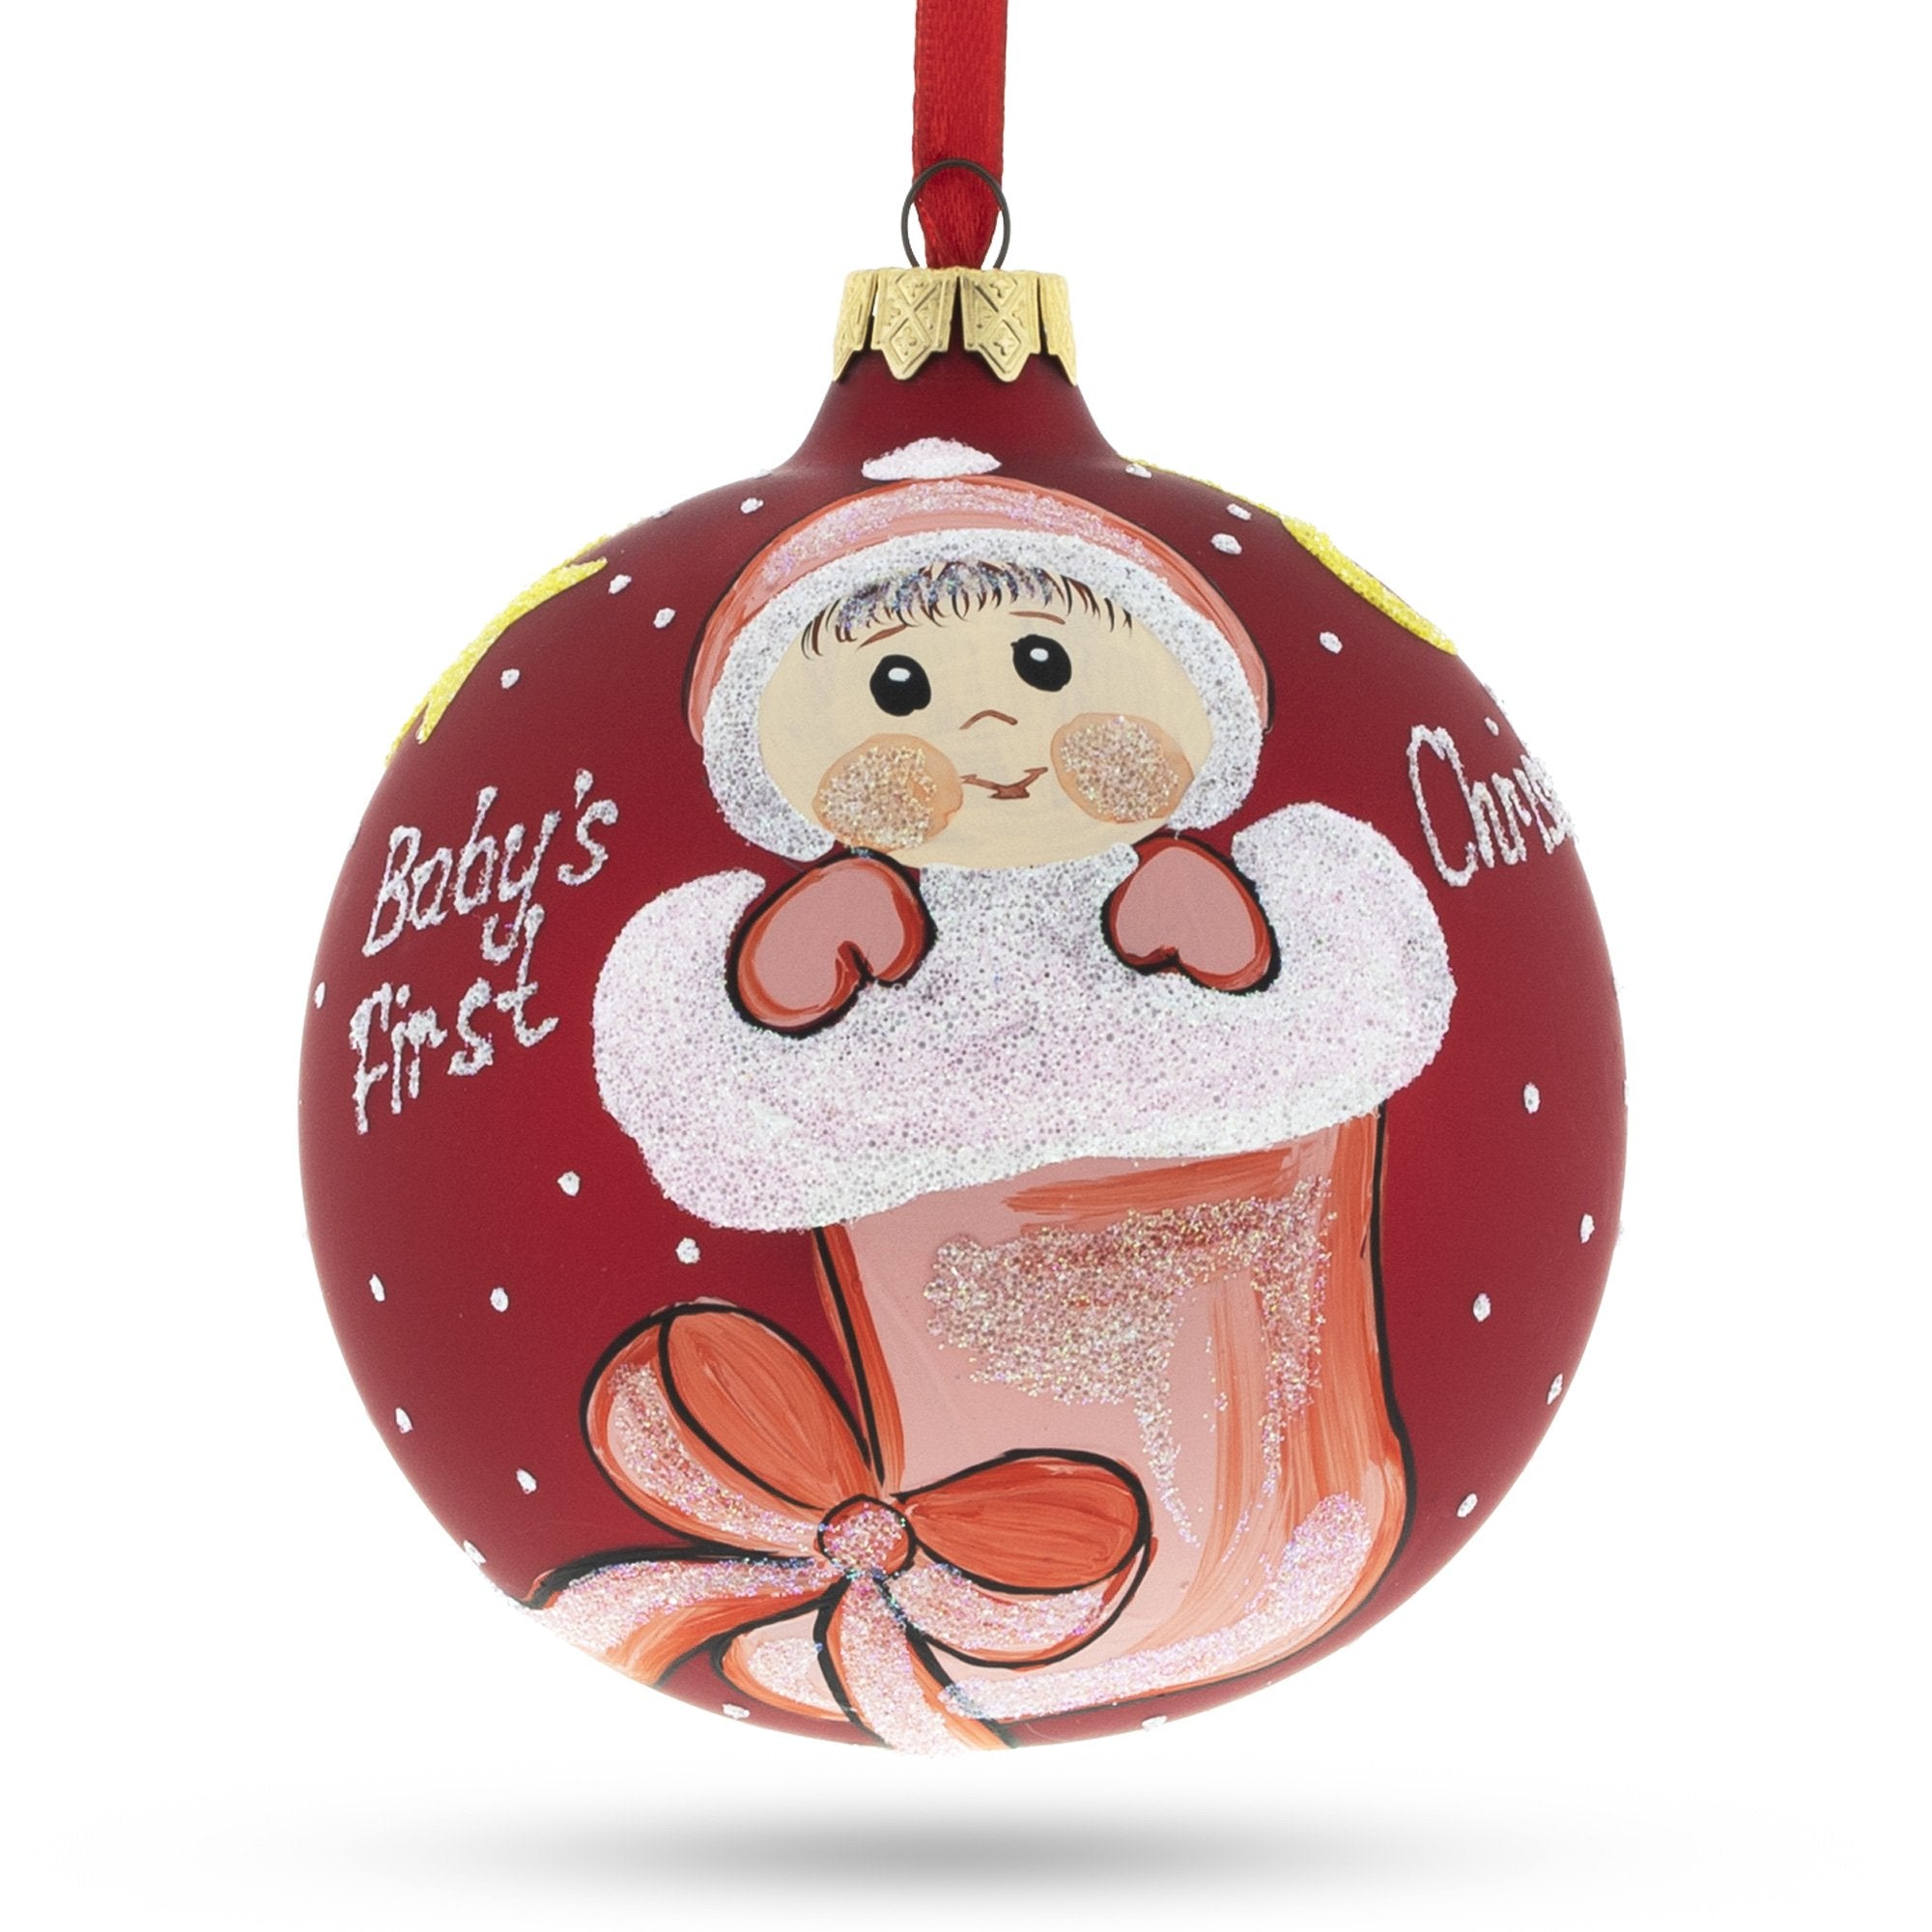 Charming Girl In Festive Christmas Stocking Blown Glass Ball Baby's First Christmas Ornament 4 Inches